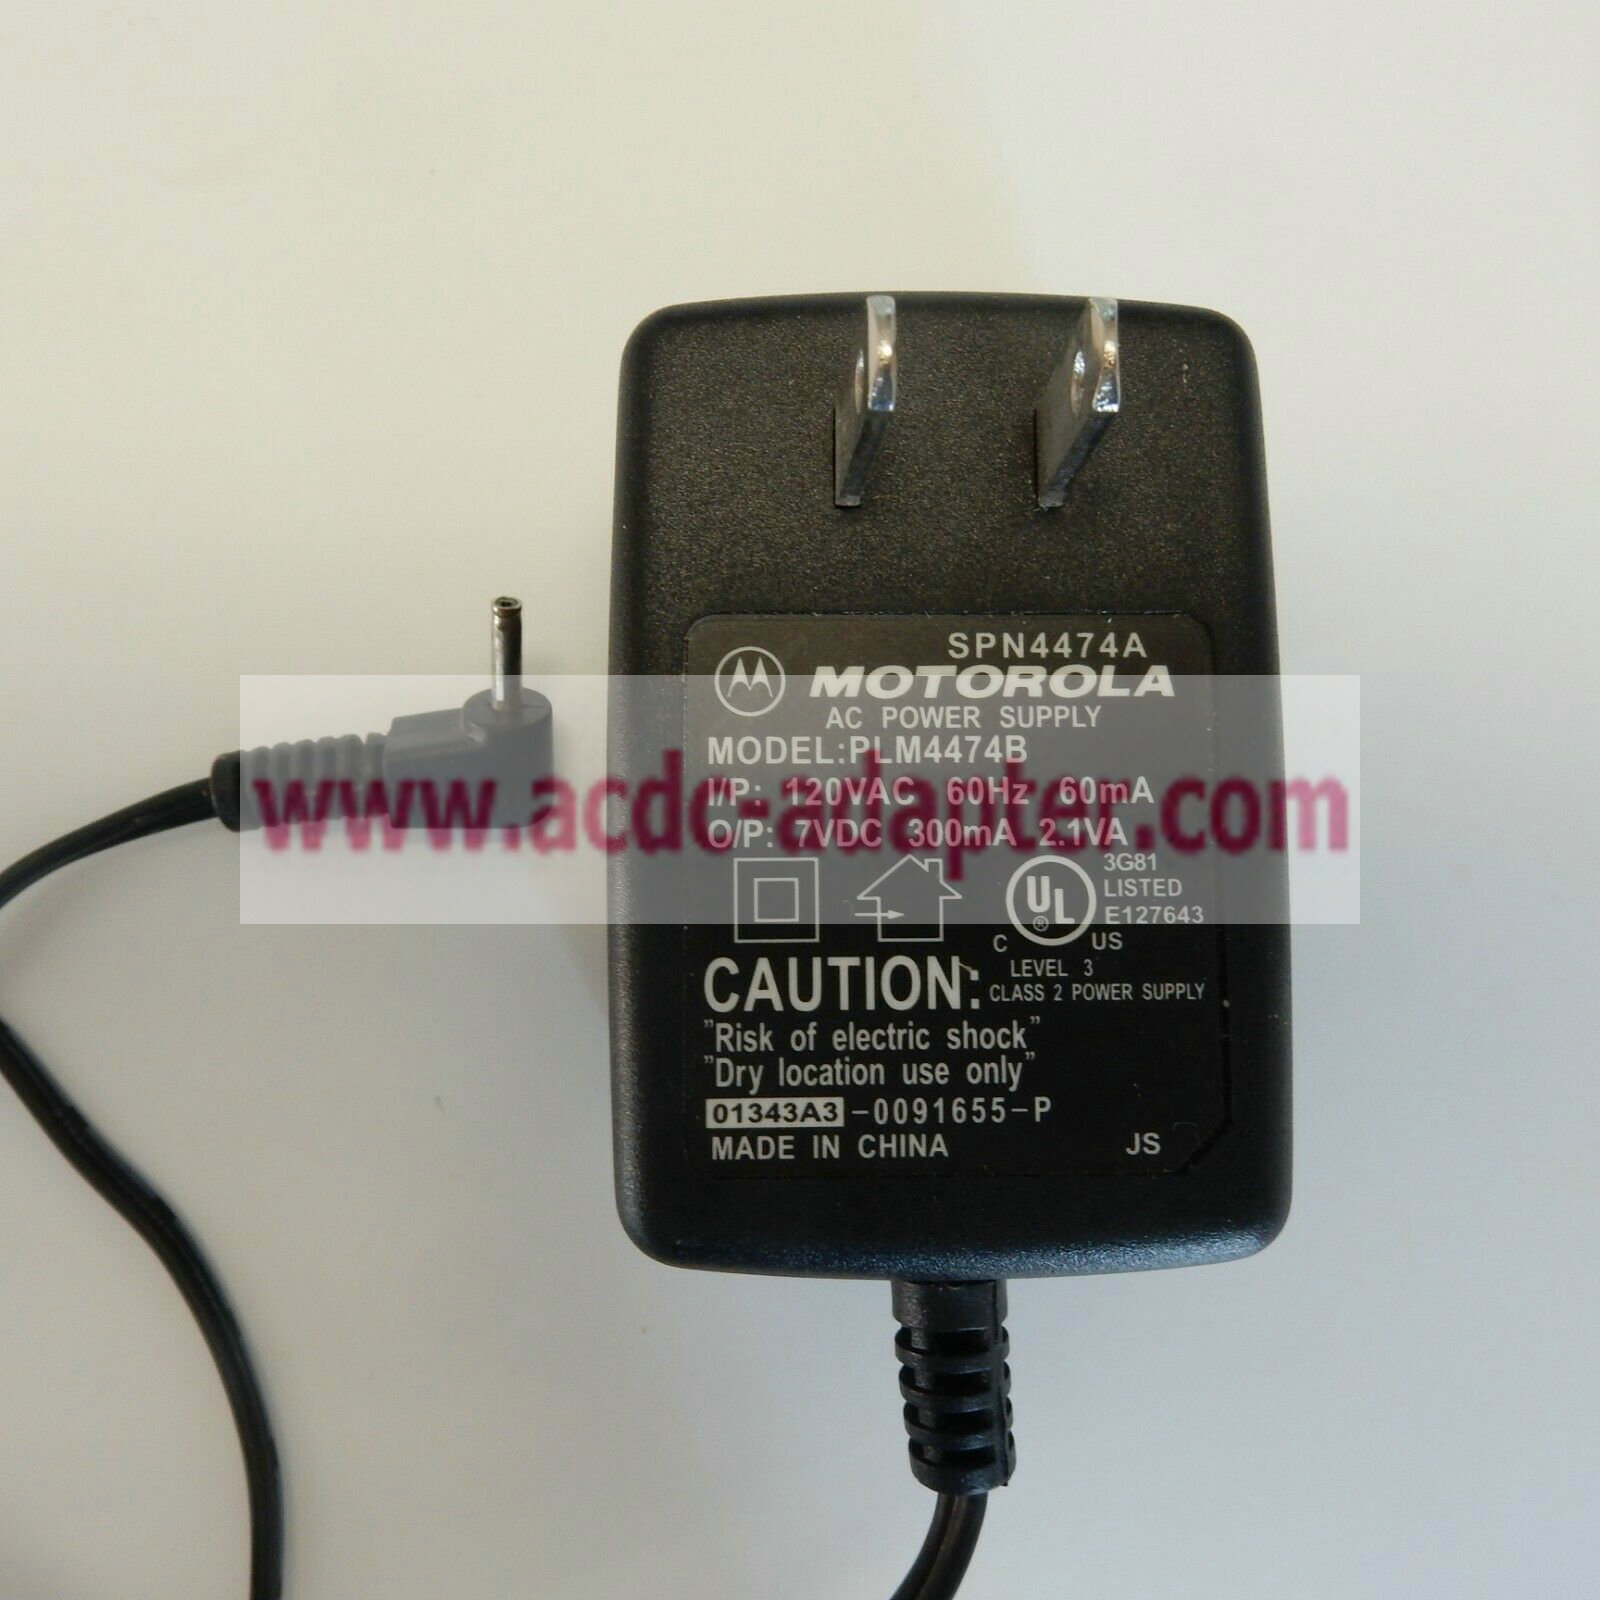 New Motorola PLM4474B Power Supply Charger 7VDC 300mA AC/DC Adapter for Cellphone